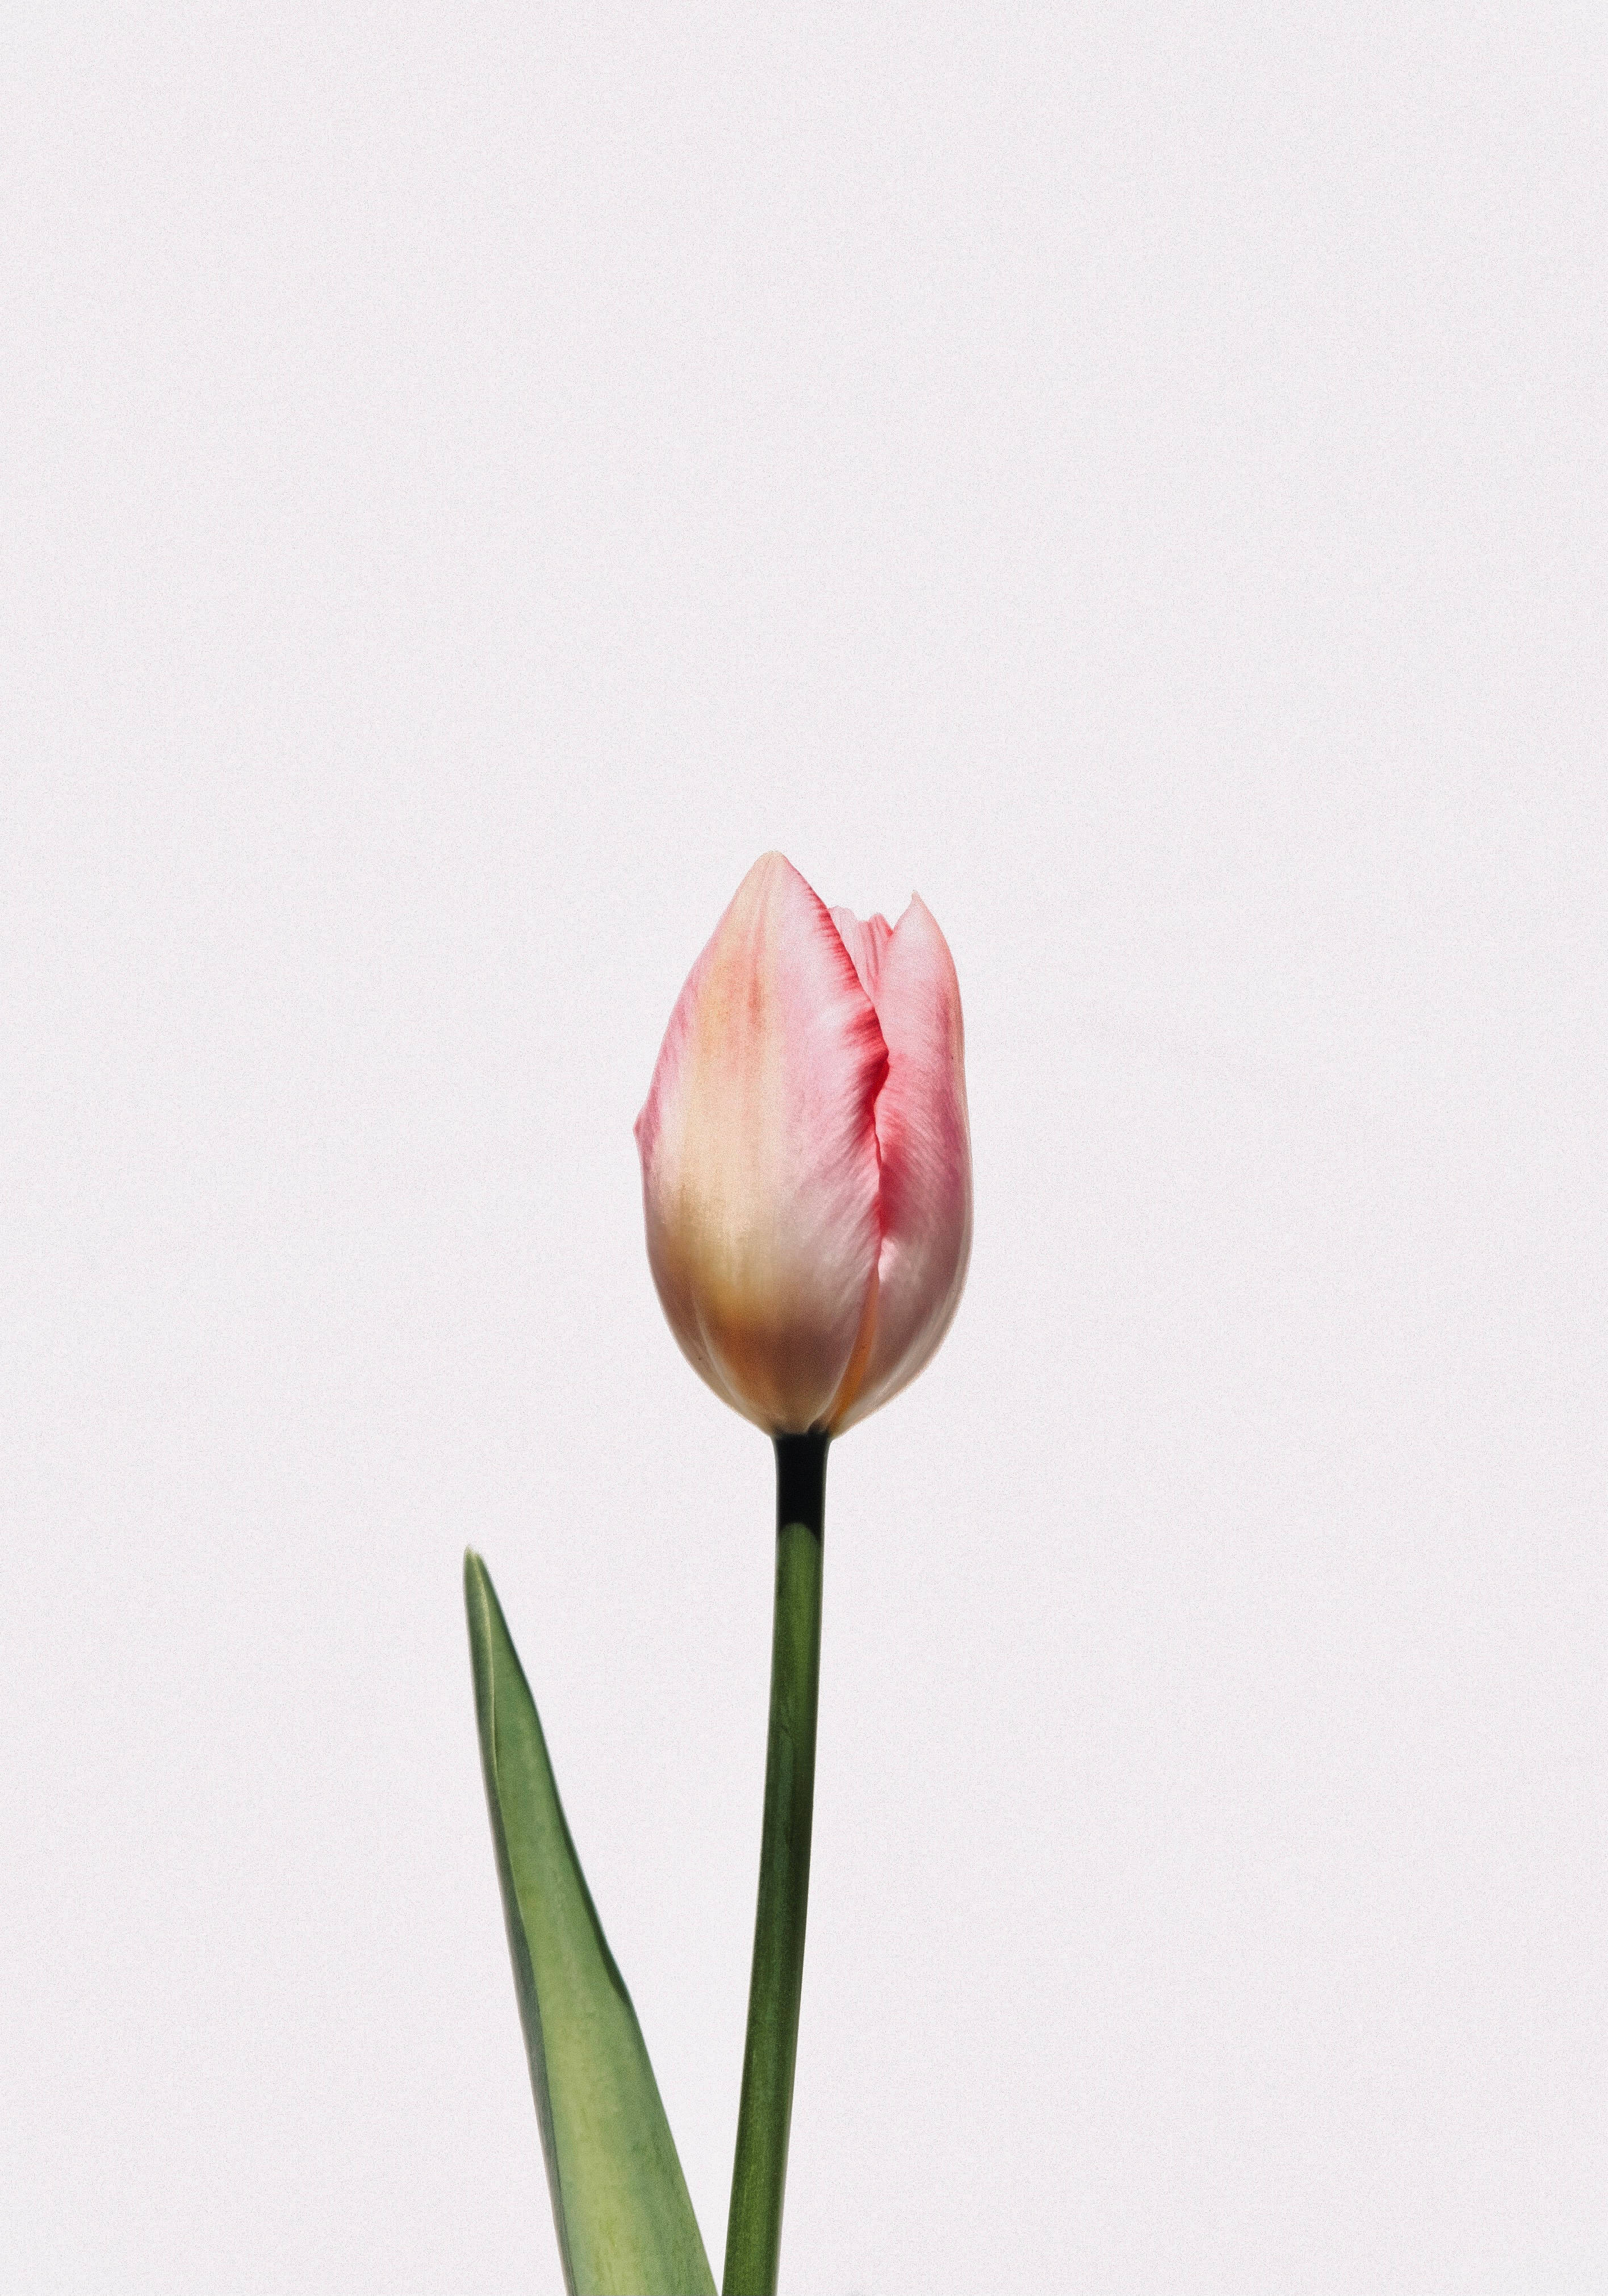 A pink tulip on a white background - Tulip